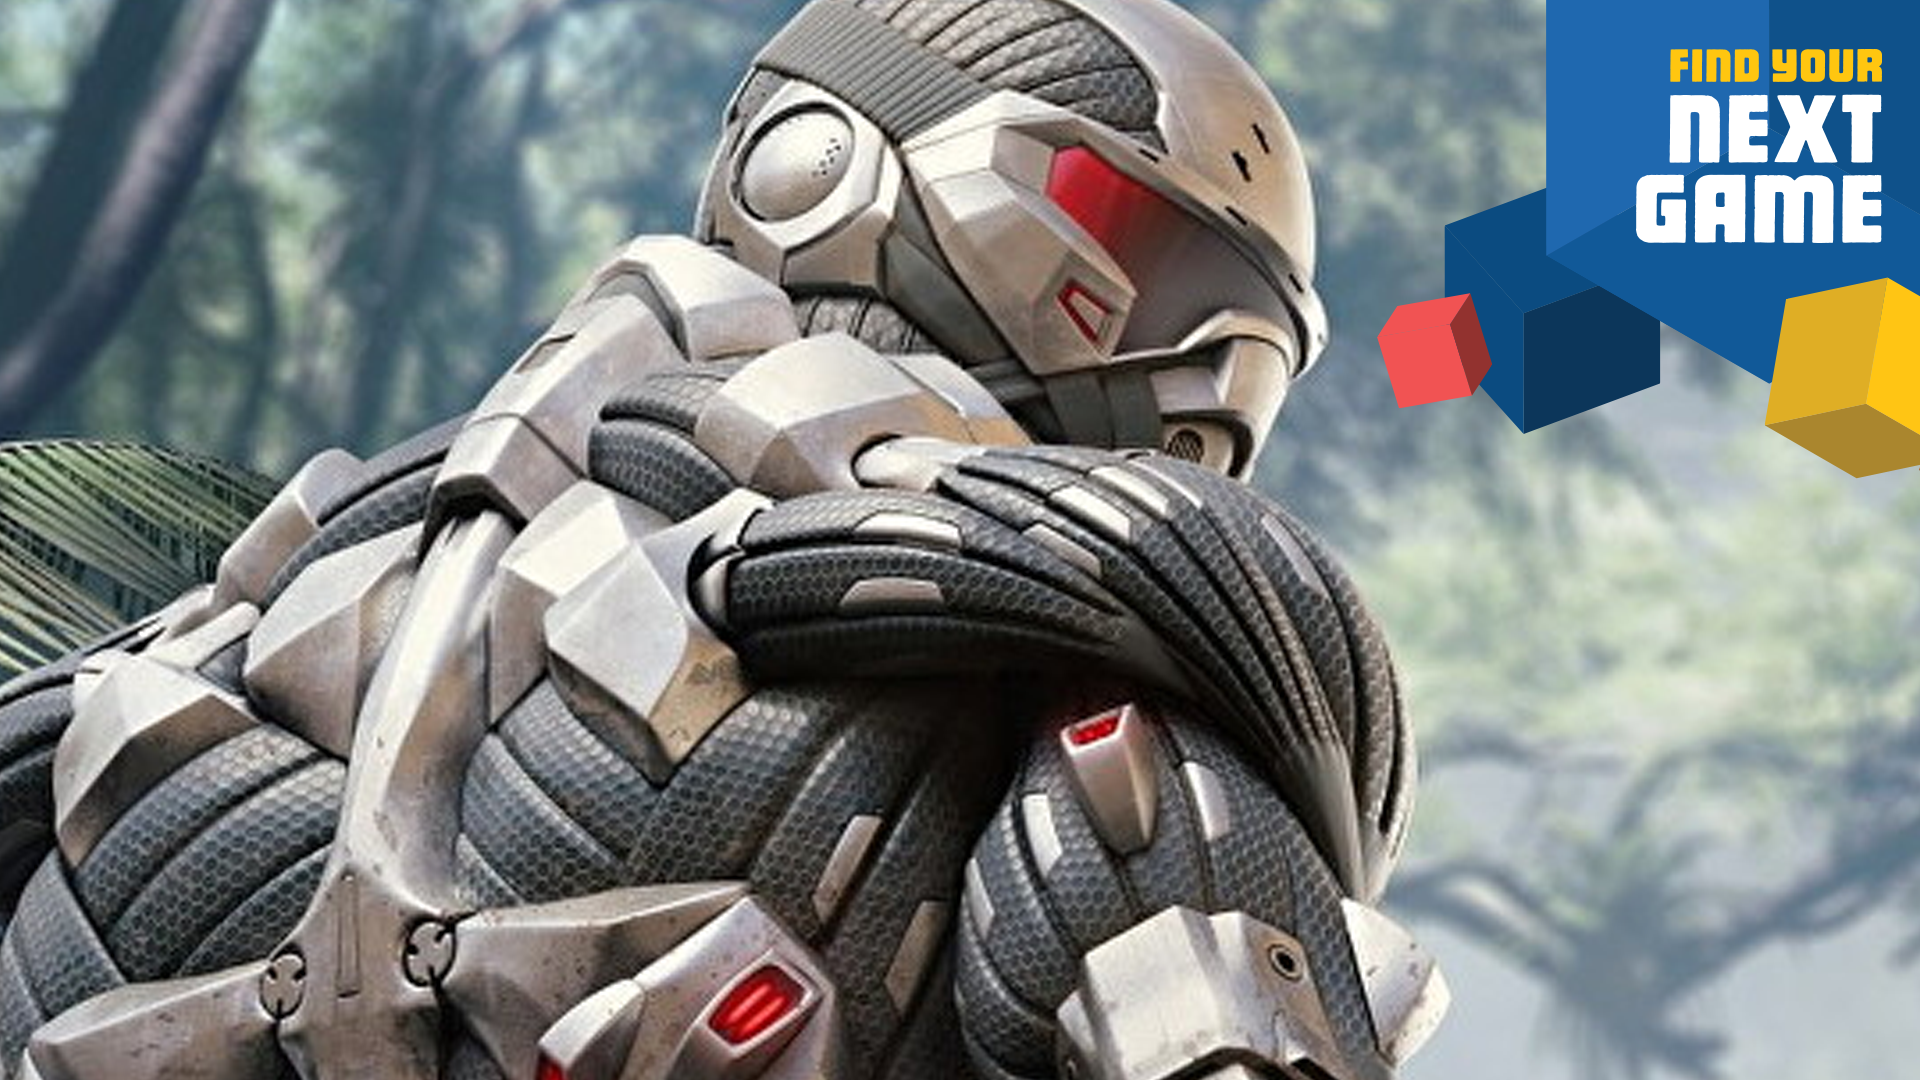 Crysis Remastered to be released on July 23 on Nintendo Switch